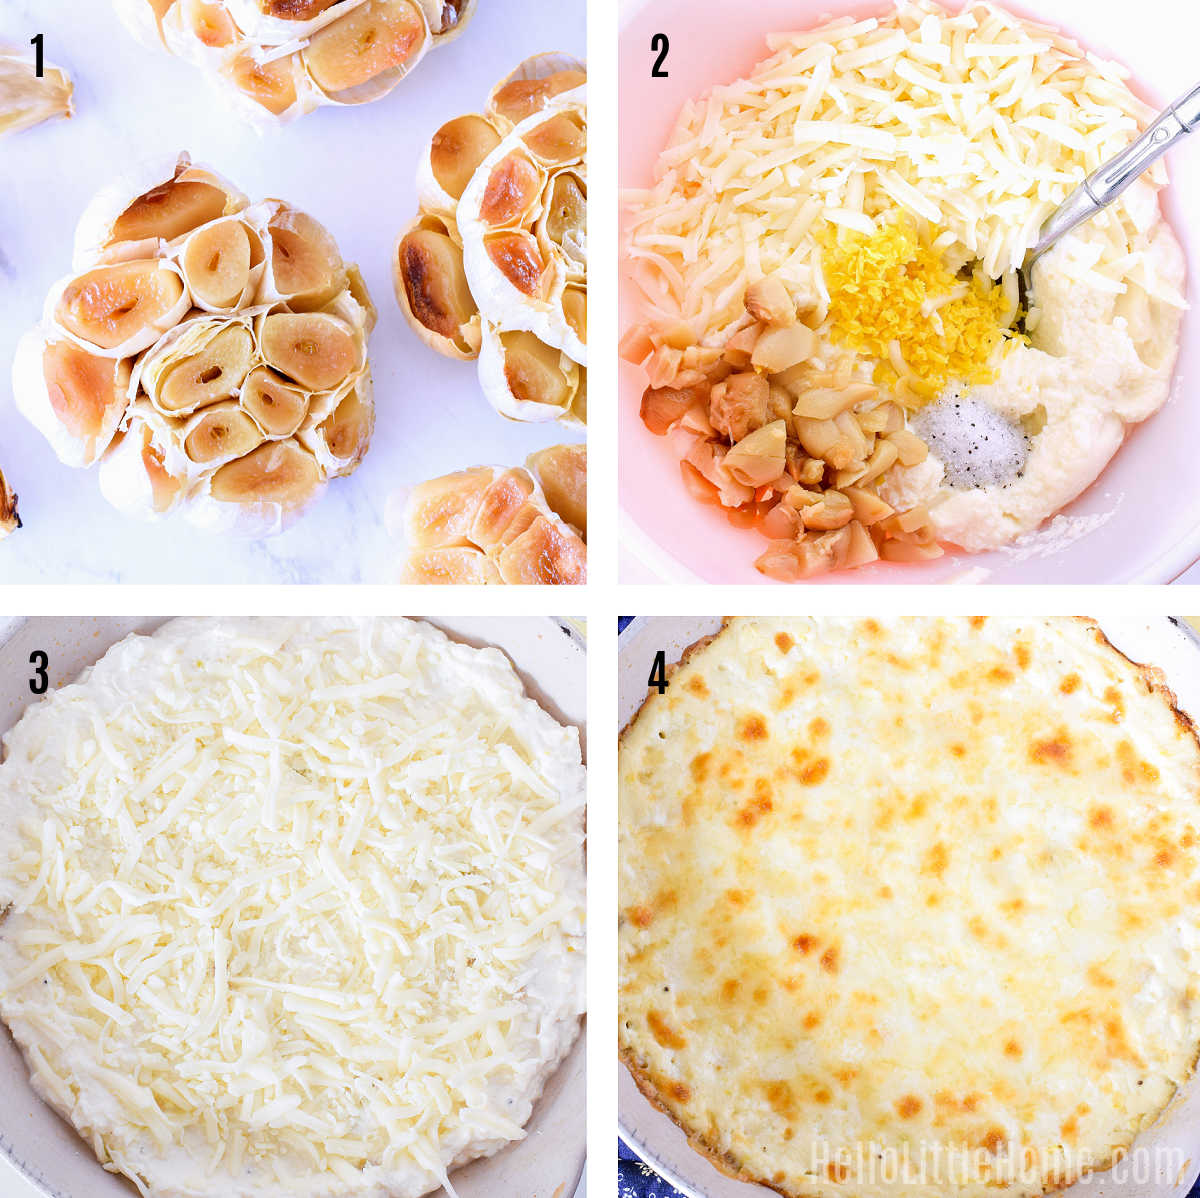 A photo collage showing how to make baked ricotta step-by-step.